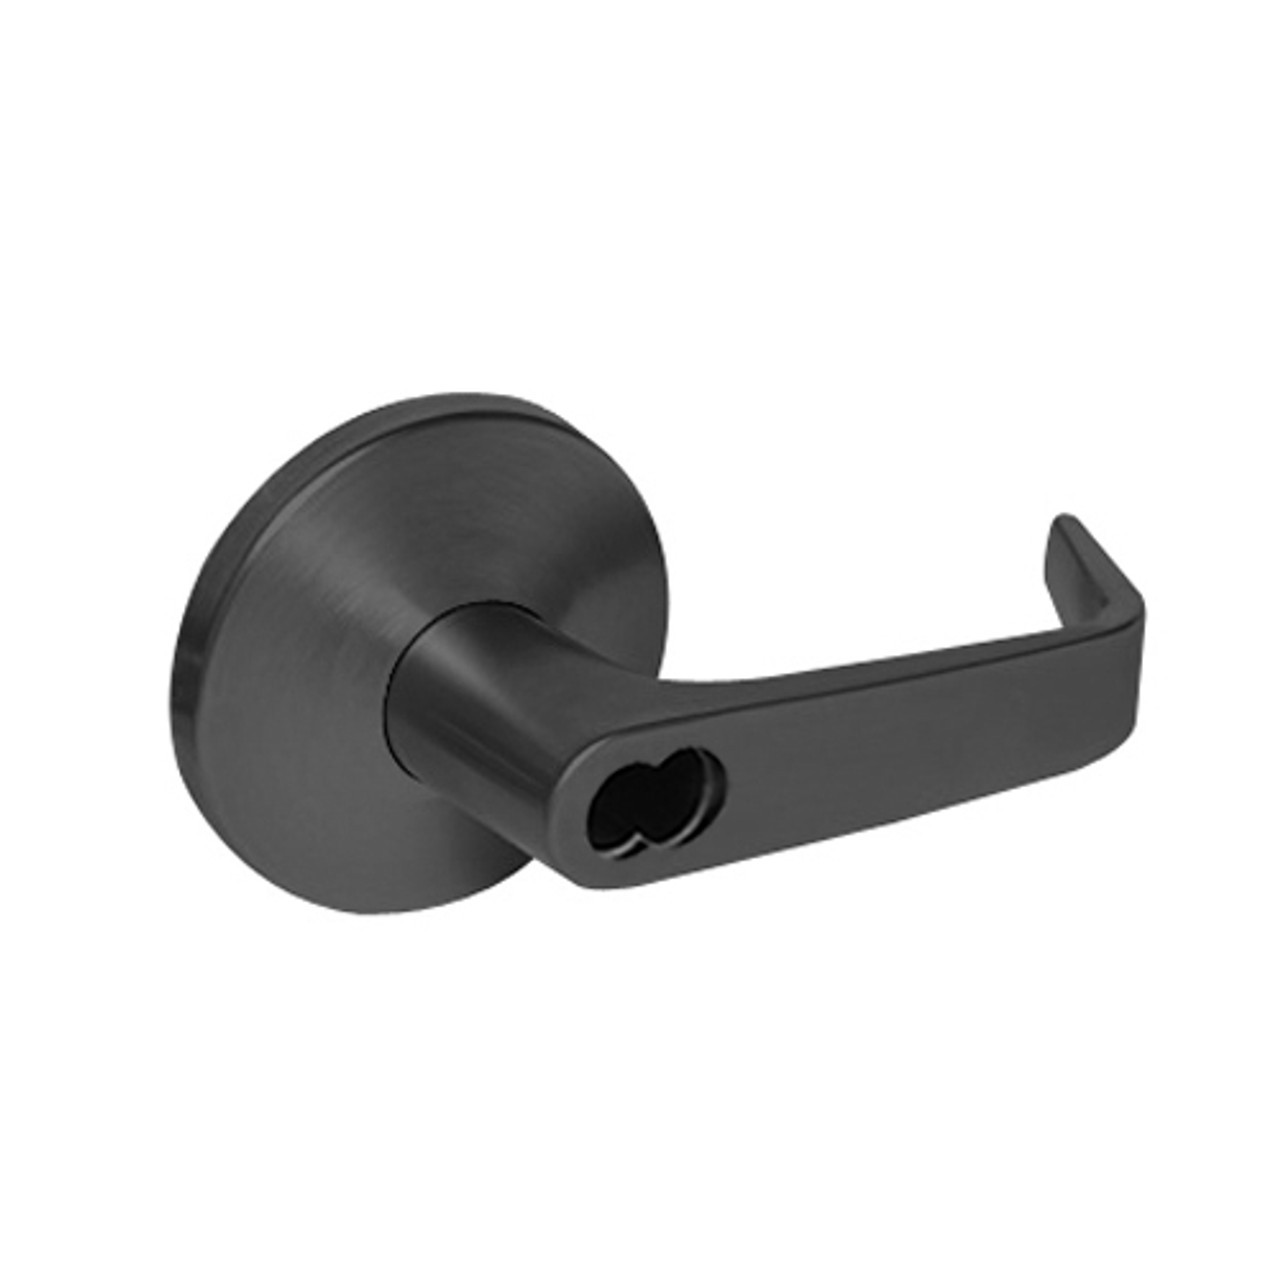 9K37DR15LS3622LM Best 9K Series Special Function Cylindrical Lever Locks with Contour Angle with Return Lever Design Accept 7 Pin Best Core in Black